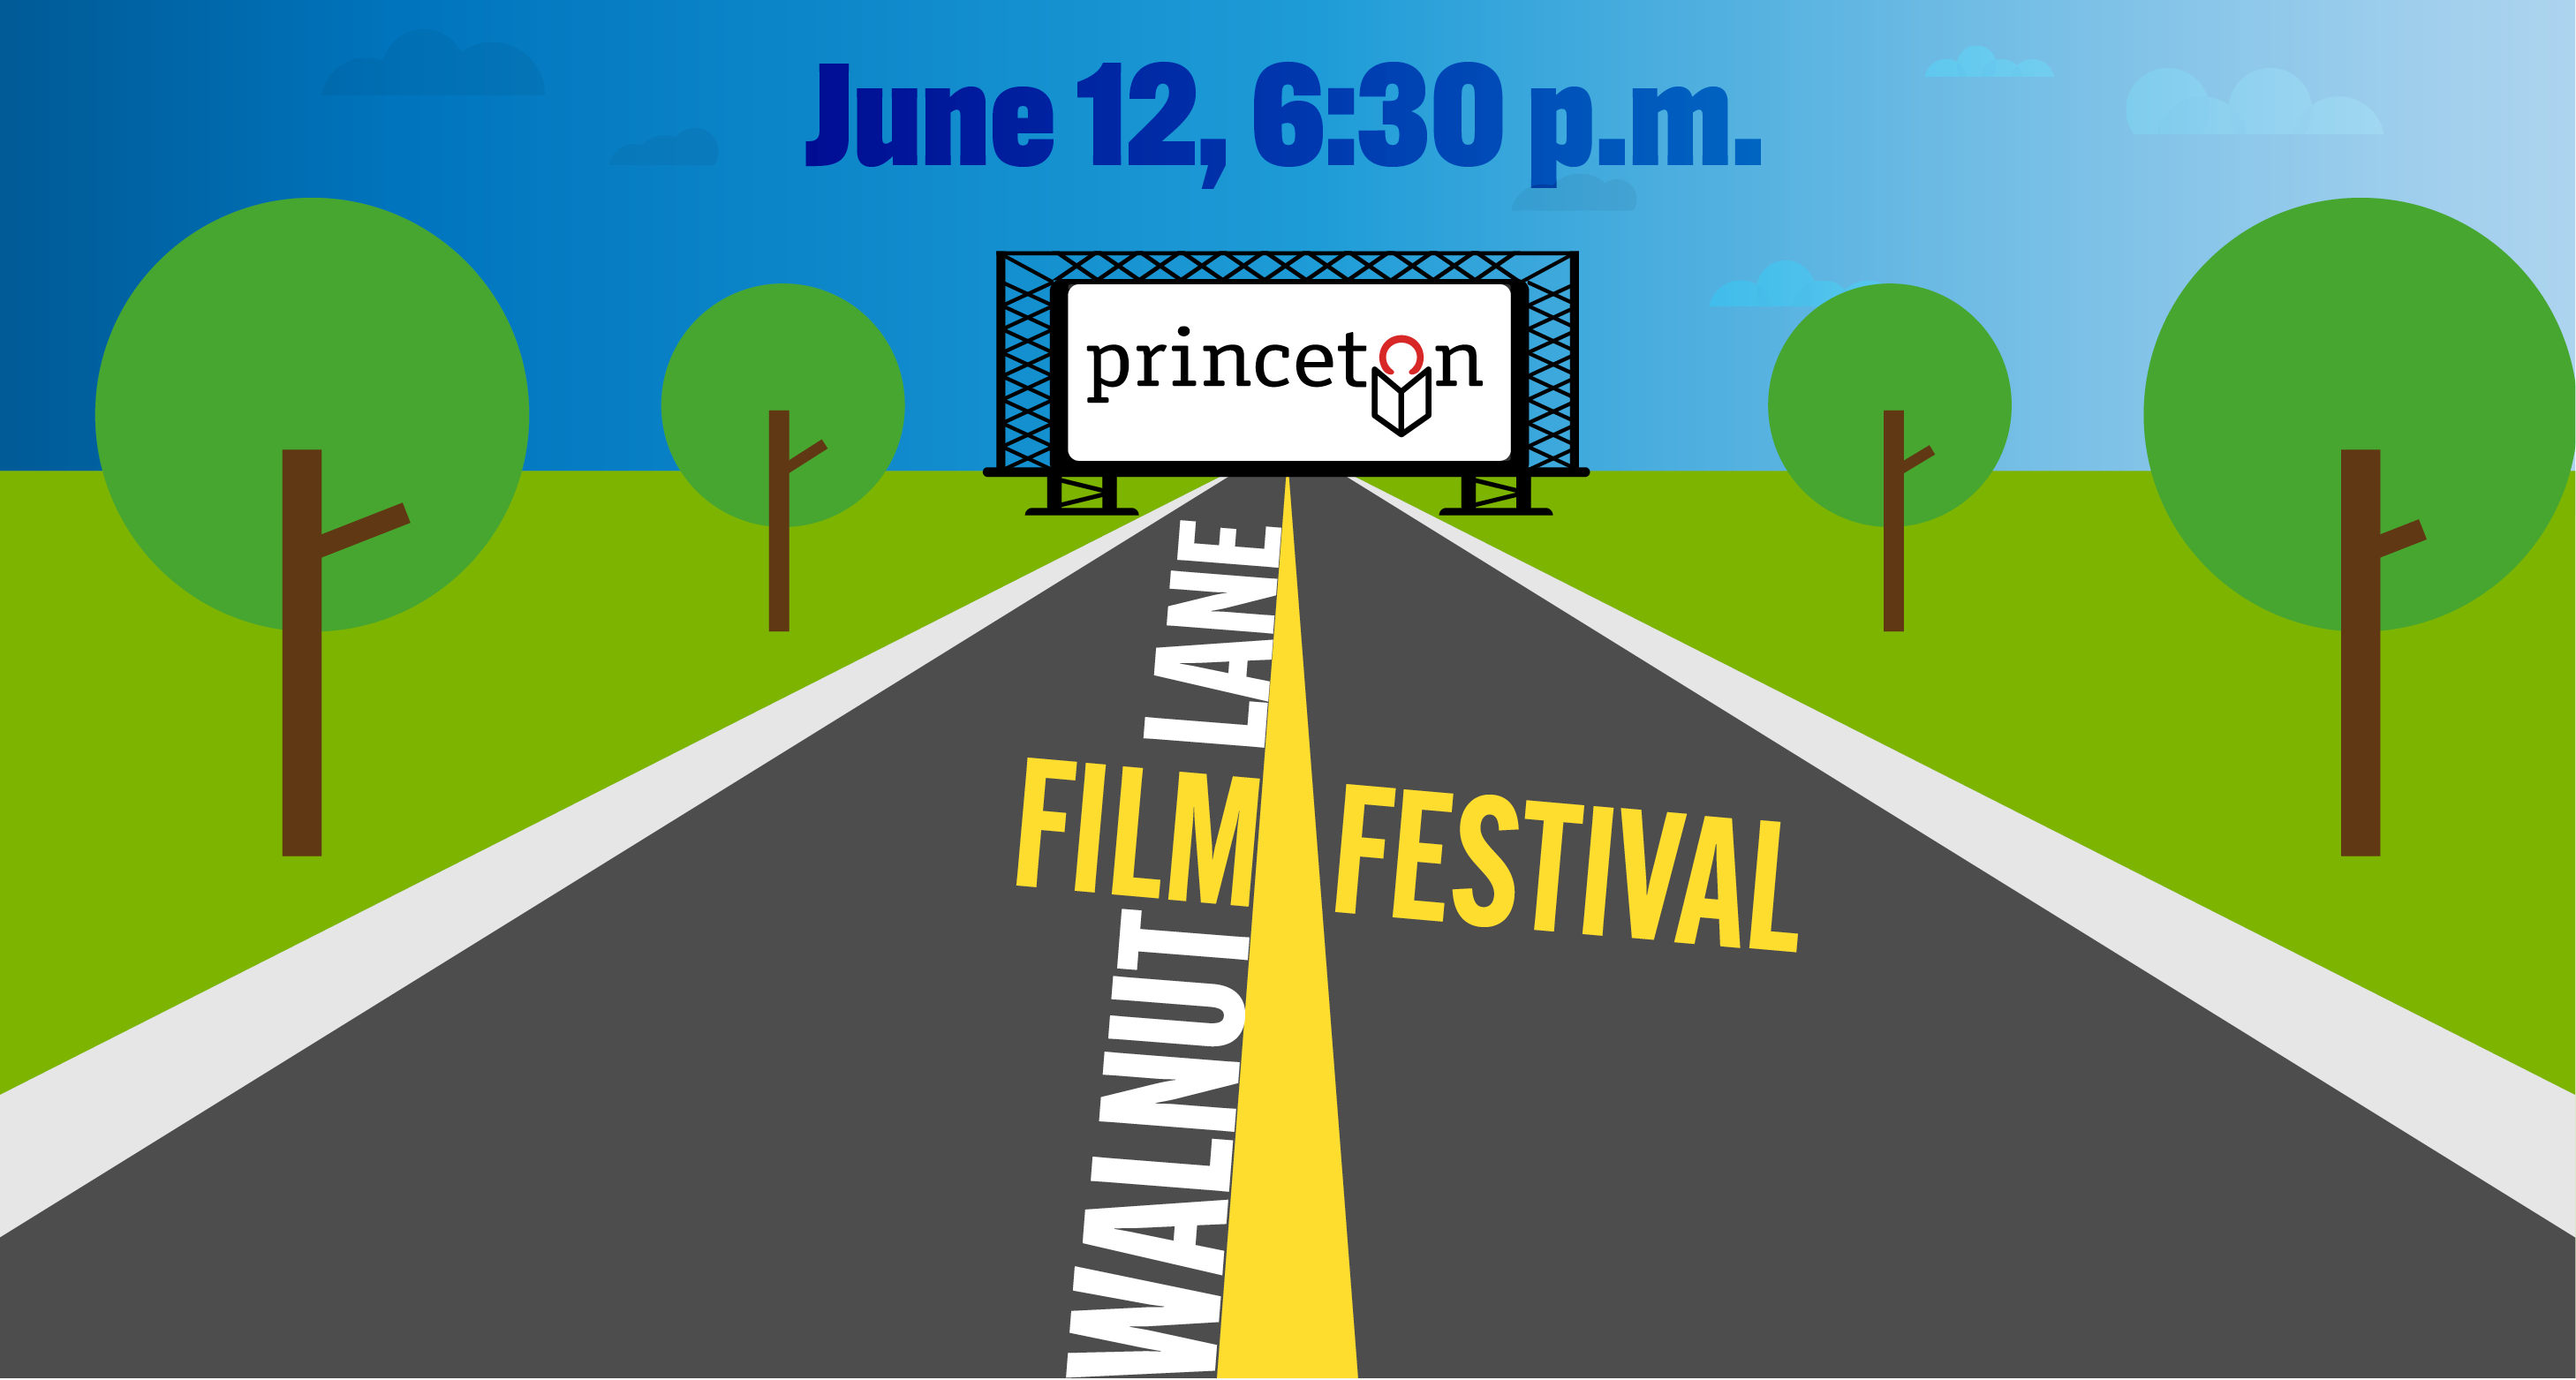 Graphic of outdoor movie screen with Walnut Lane Film Festival June 12